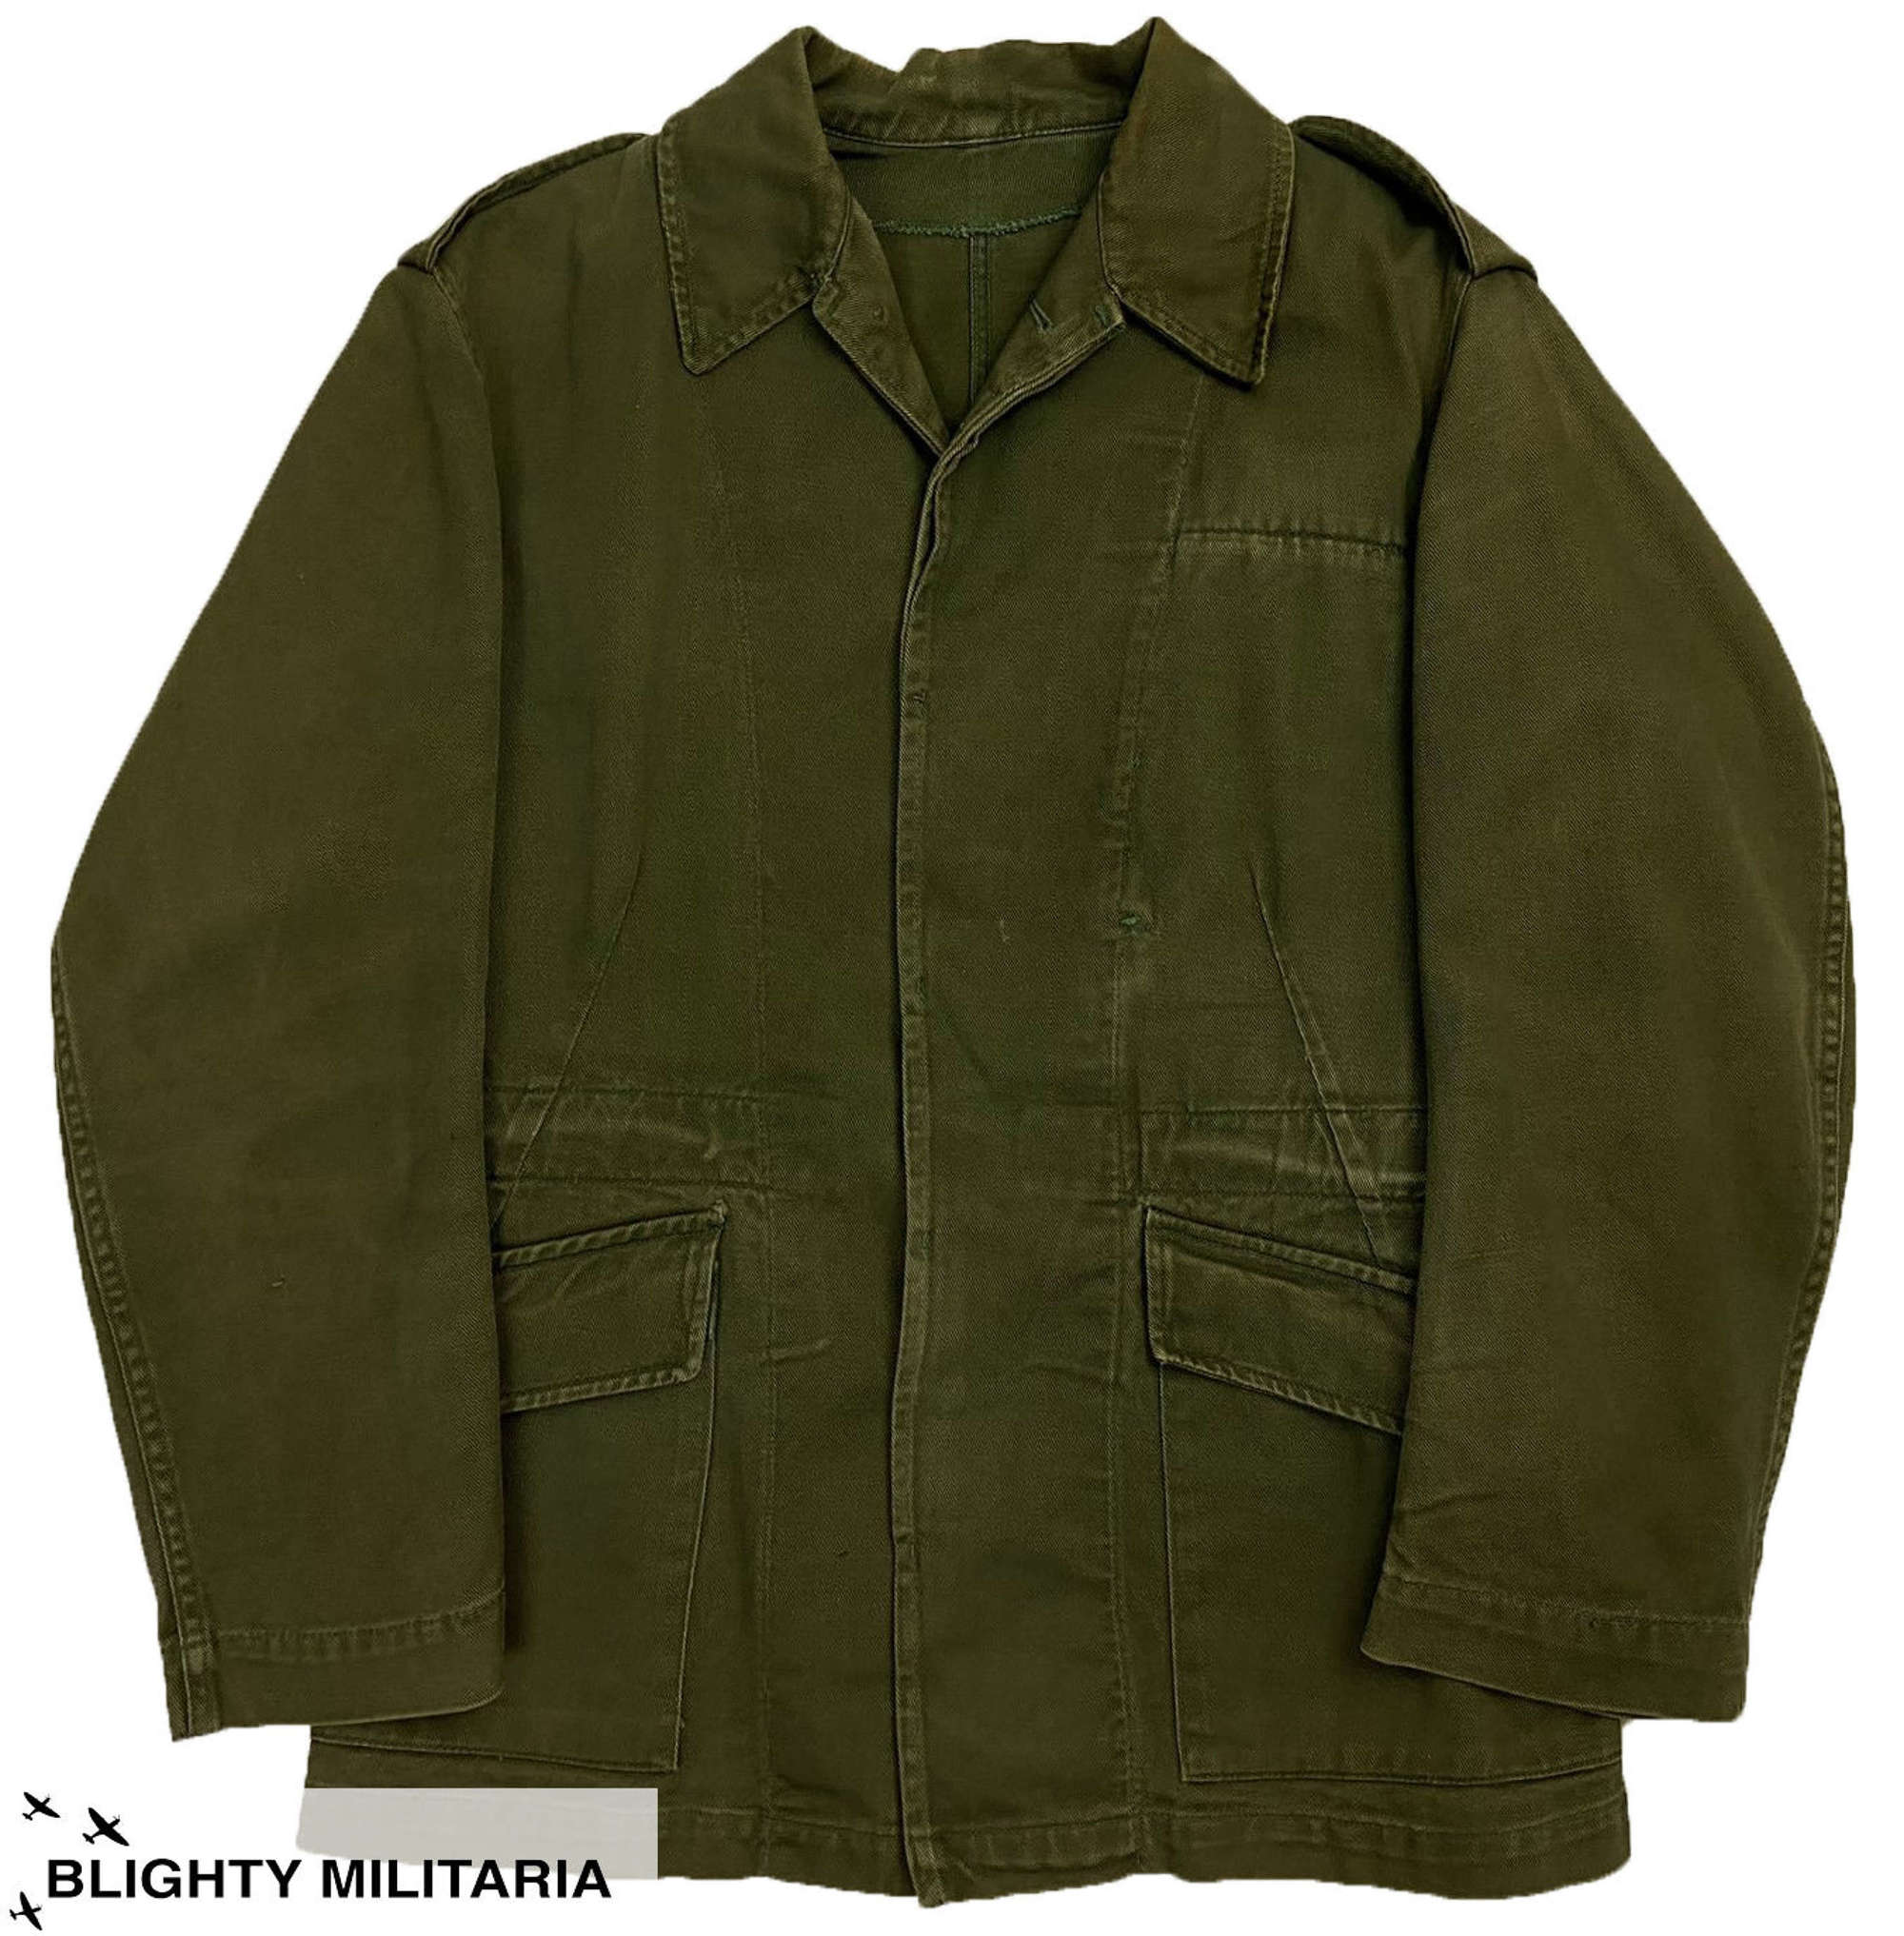 Original 1964 Dated 'Jacket, Overall, Green' - Size 1